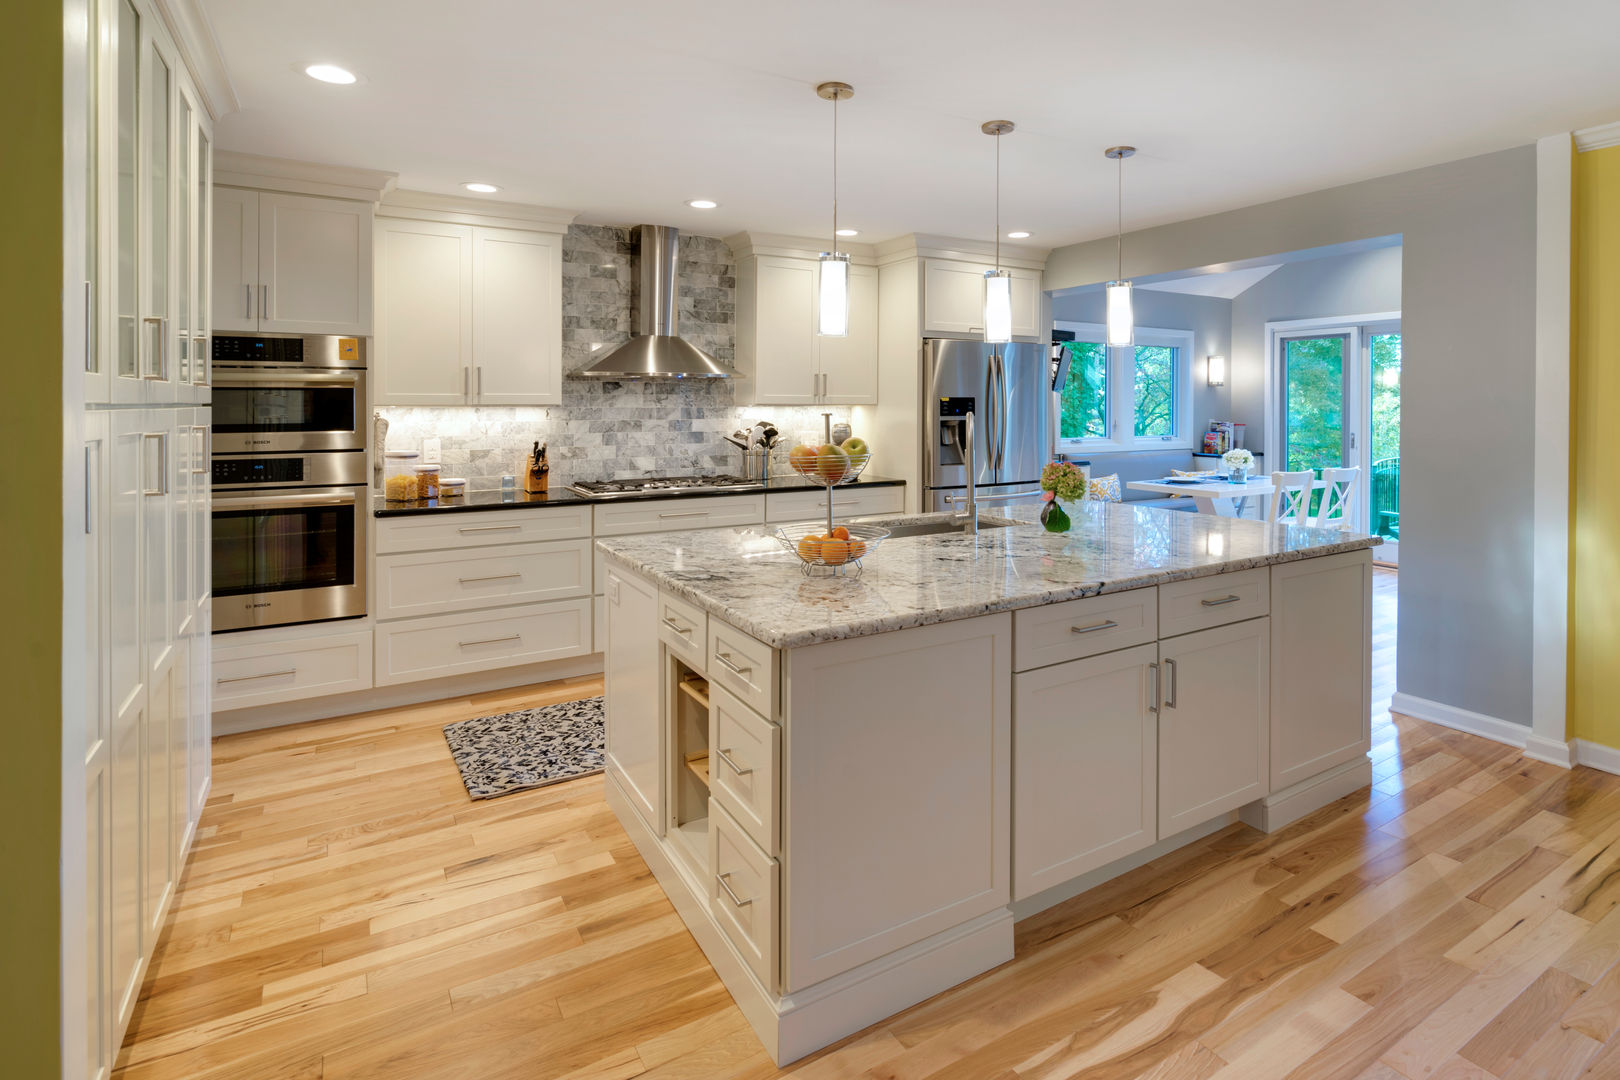 White Shaker Kitchen with Island Main Line Kitchen Design Kitchen beautiful kitchen,kitchen design,hickory floors